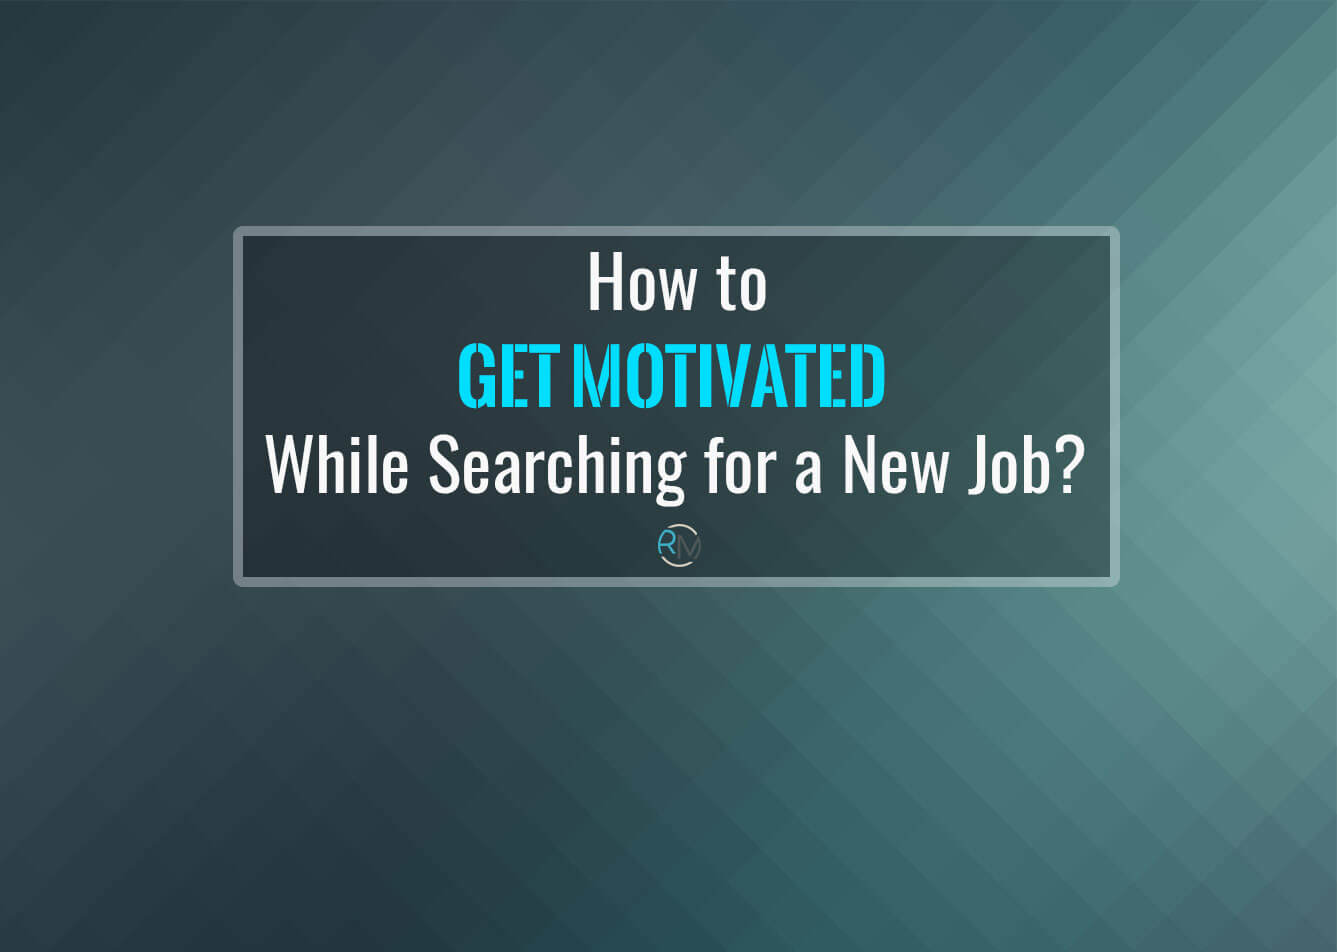 How to Get Motivated While Searching for A New Job